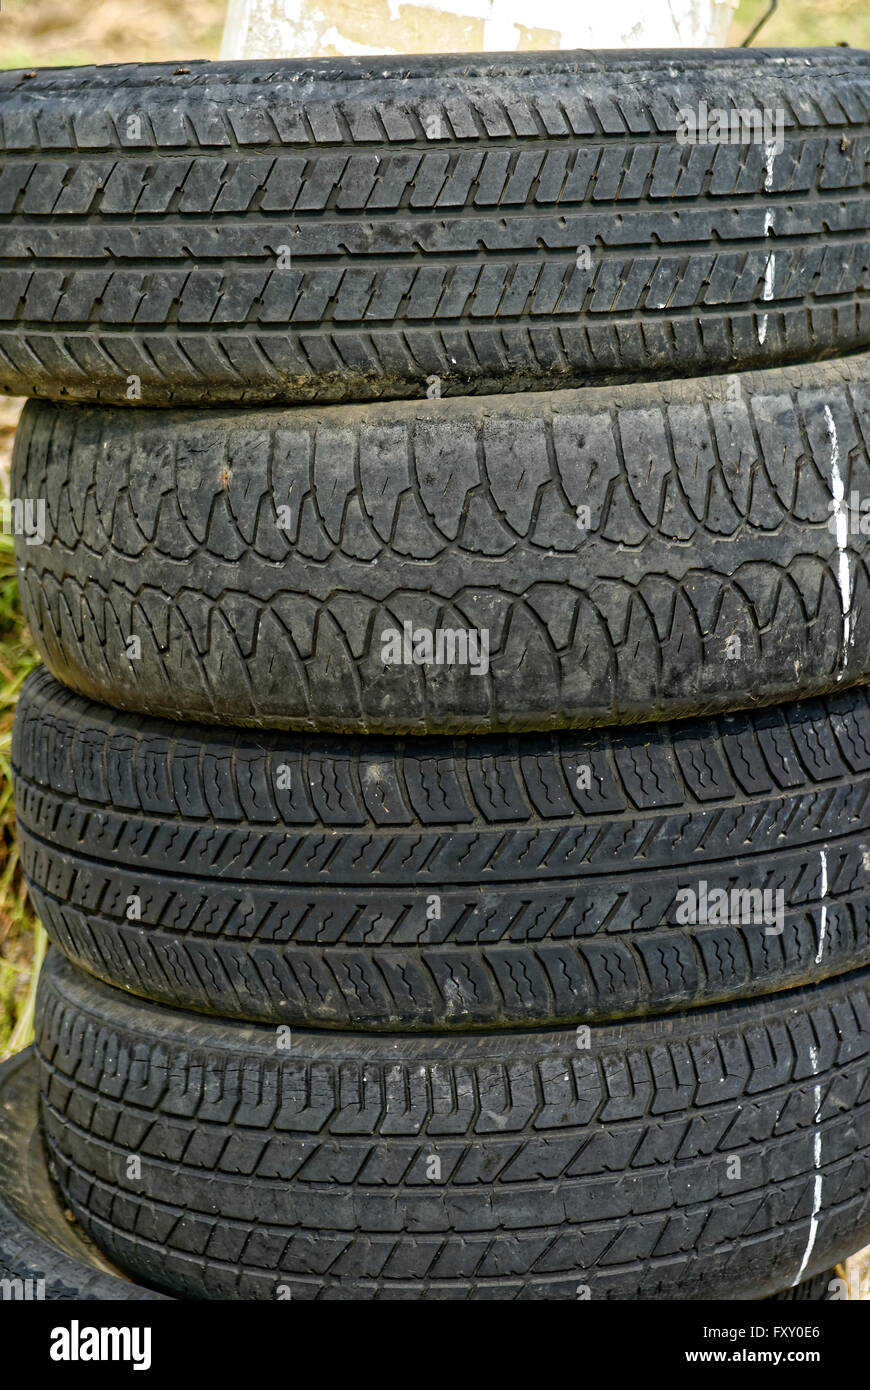 Pile of Old Used Car Tyres Stock Photo